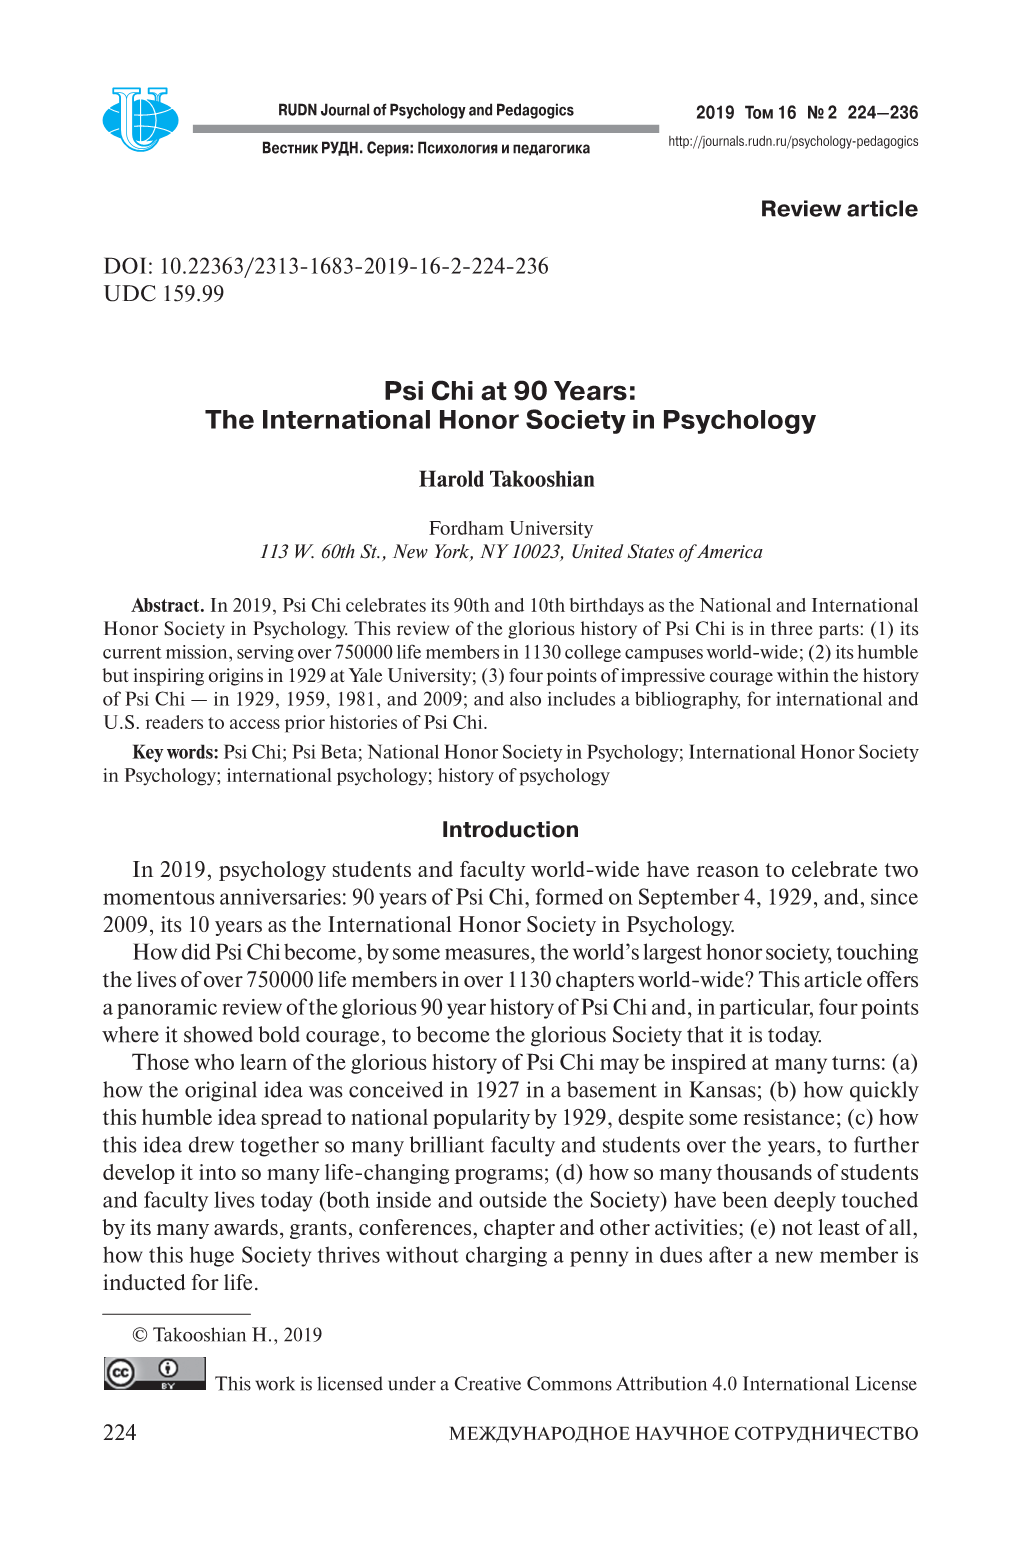 The International Honor Society in Psychology